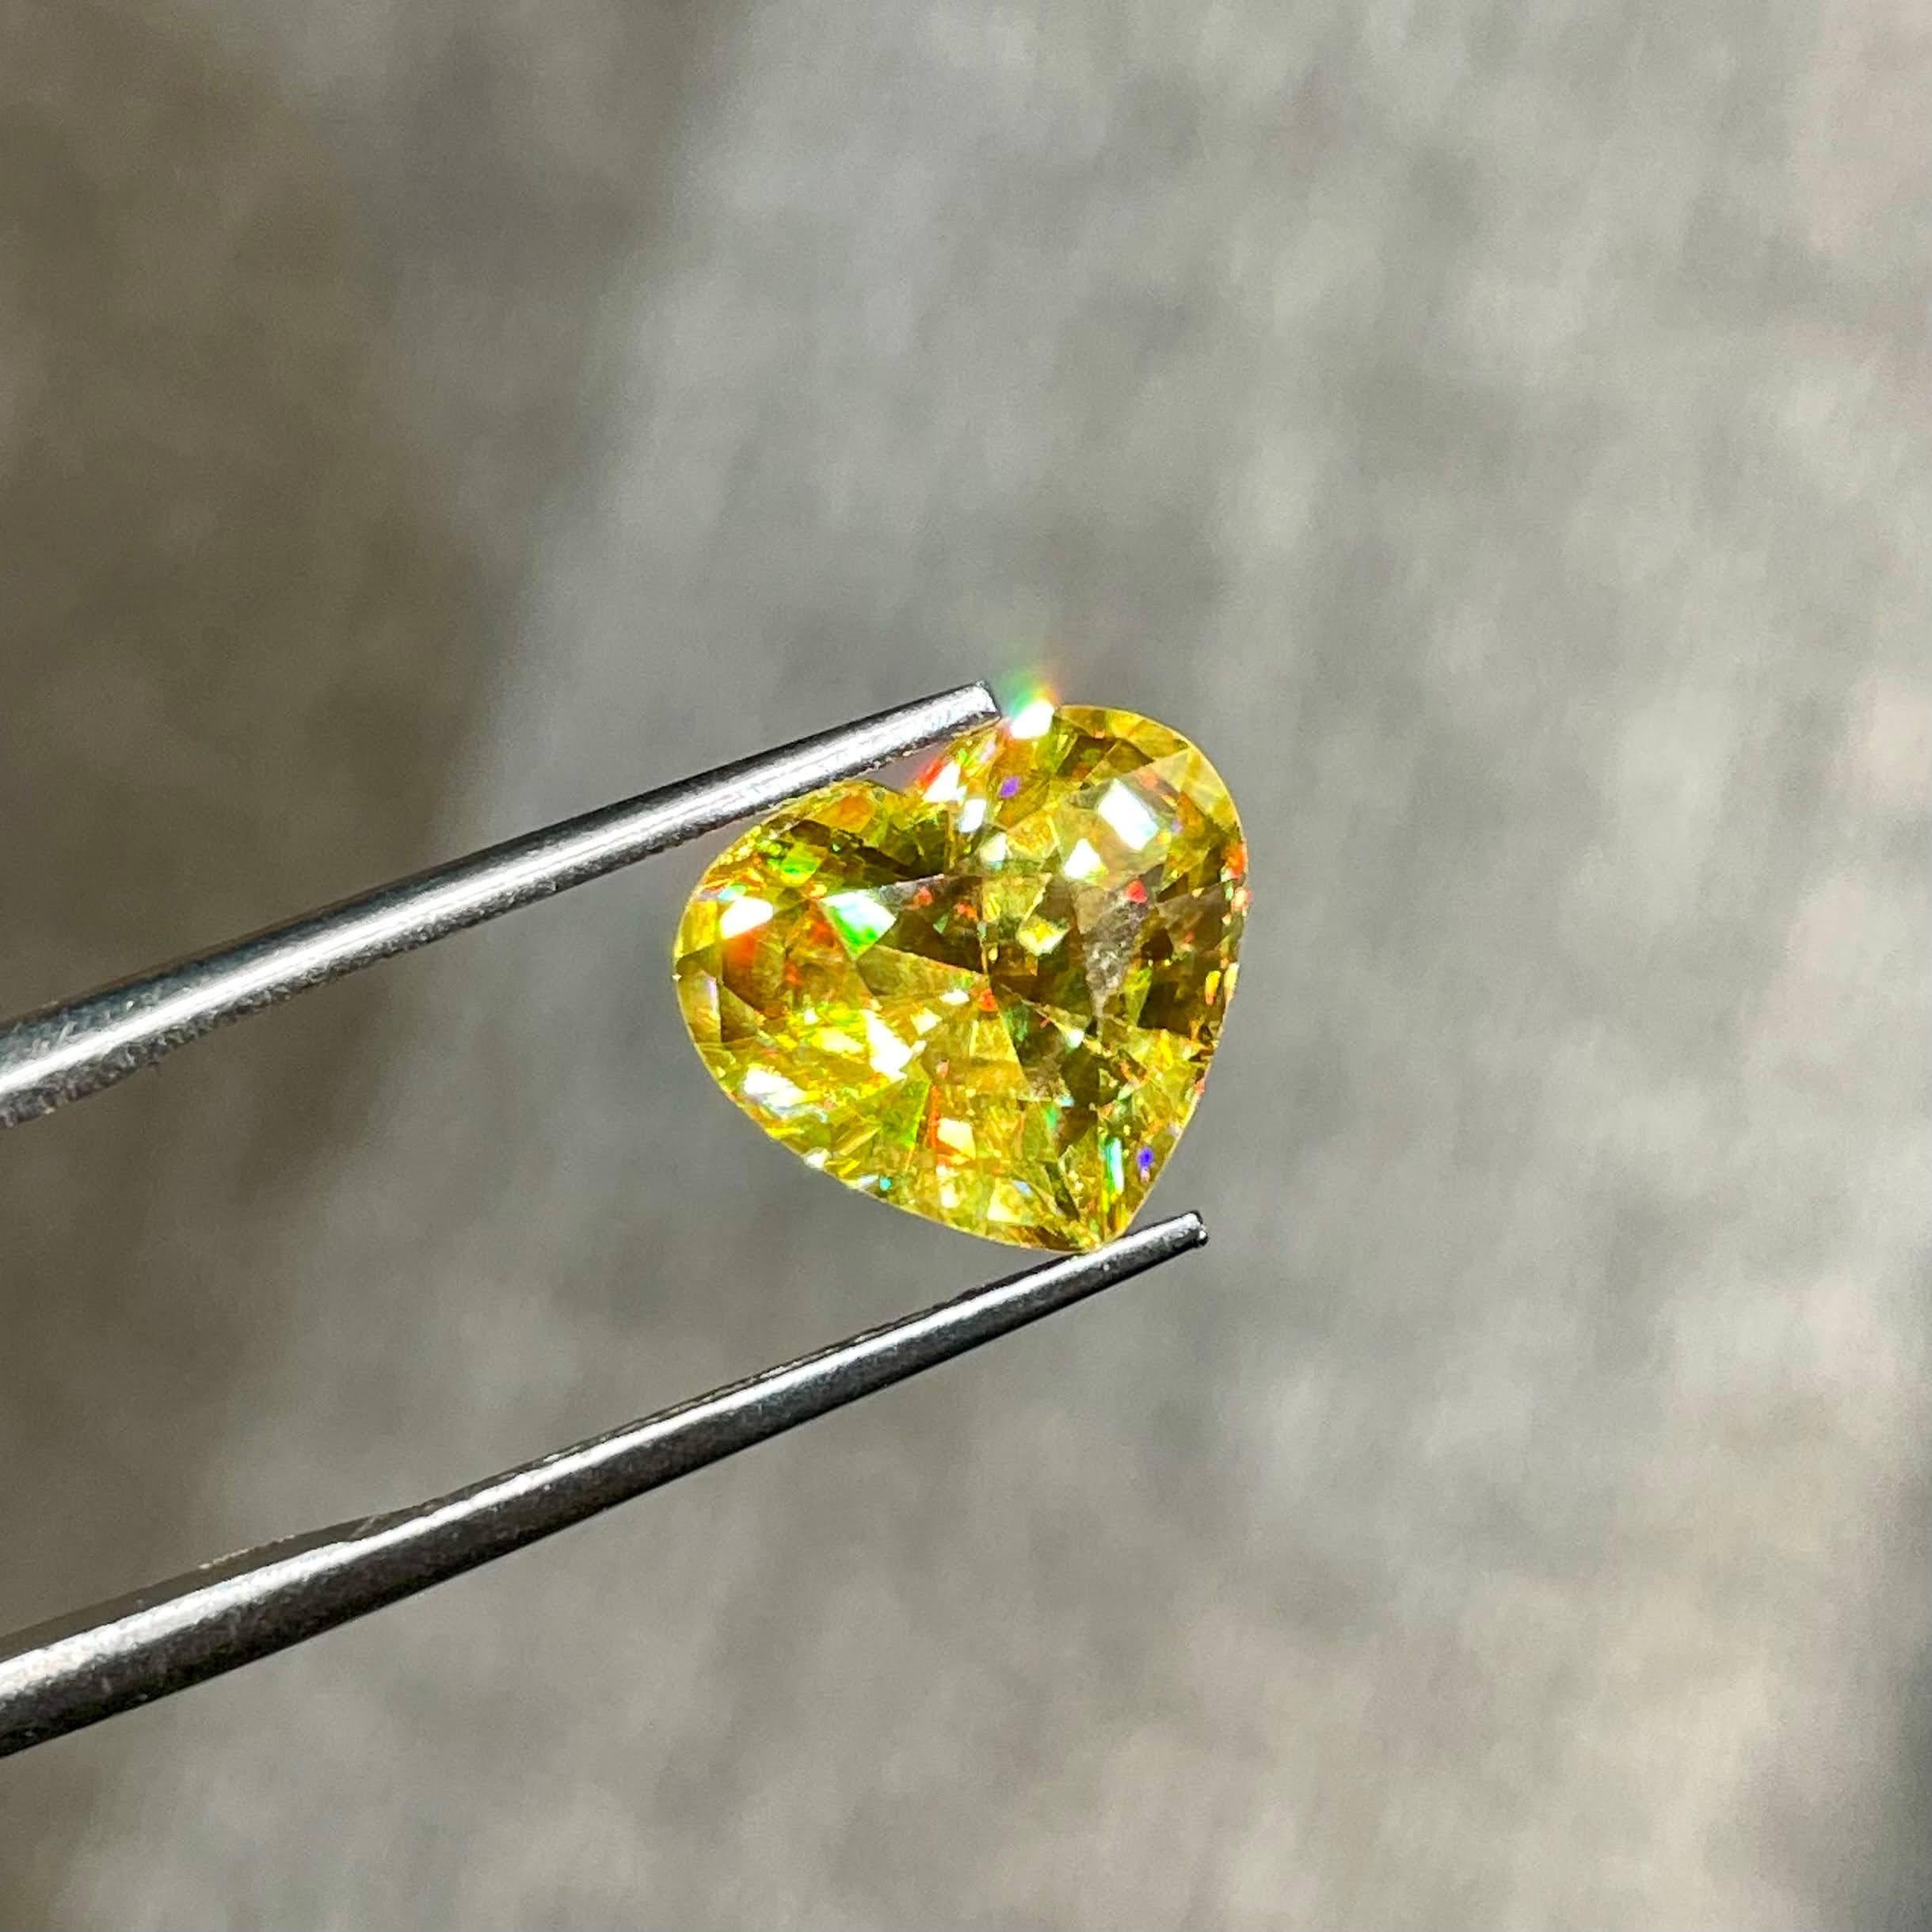 Weight 4.50 carats
Dim 11.4x10.2x6 mm
Clarity VVS
Origin Madagascar
Treatment None
Shape heart 
Cut Mix Step




The 4.50 carat Sphene stone, elegantly fashioned into a heart shape, embodies the epitome of fine quality and craftsmanship. Hailing